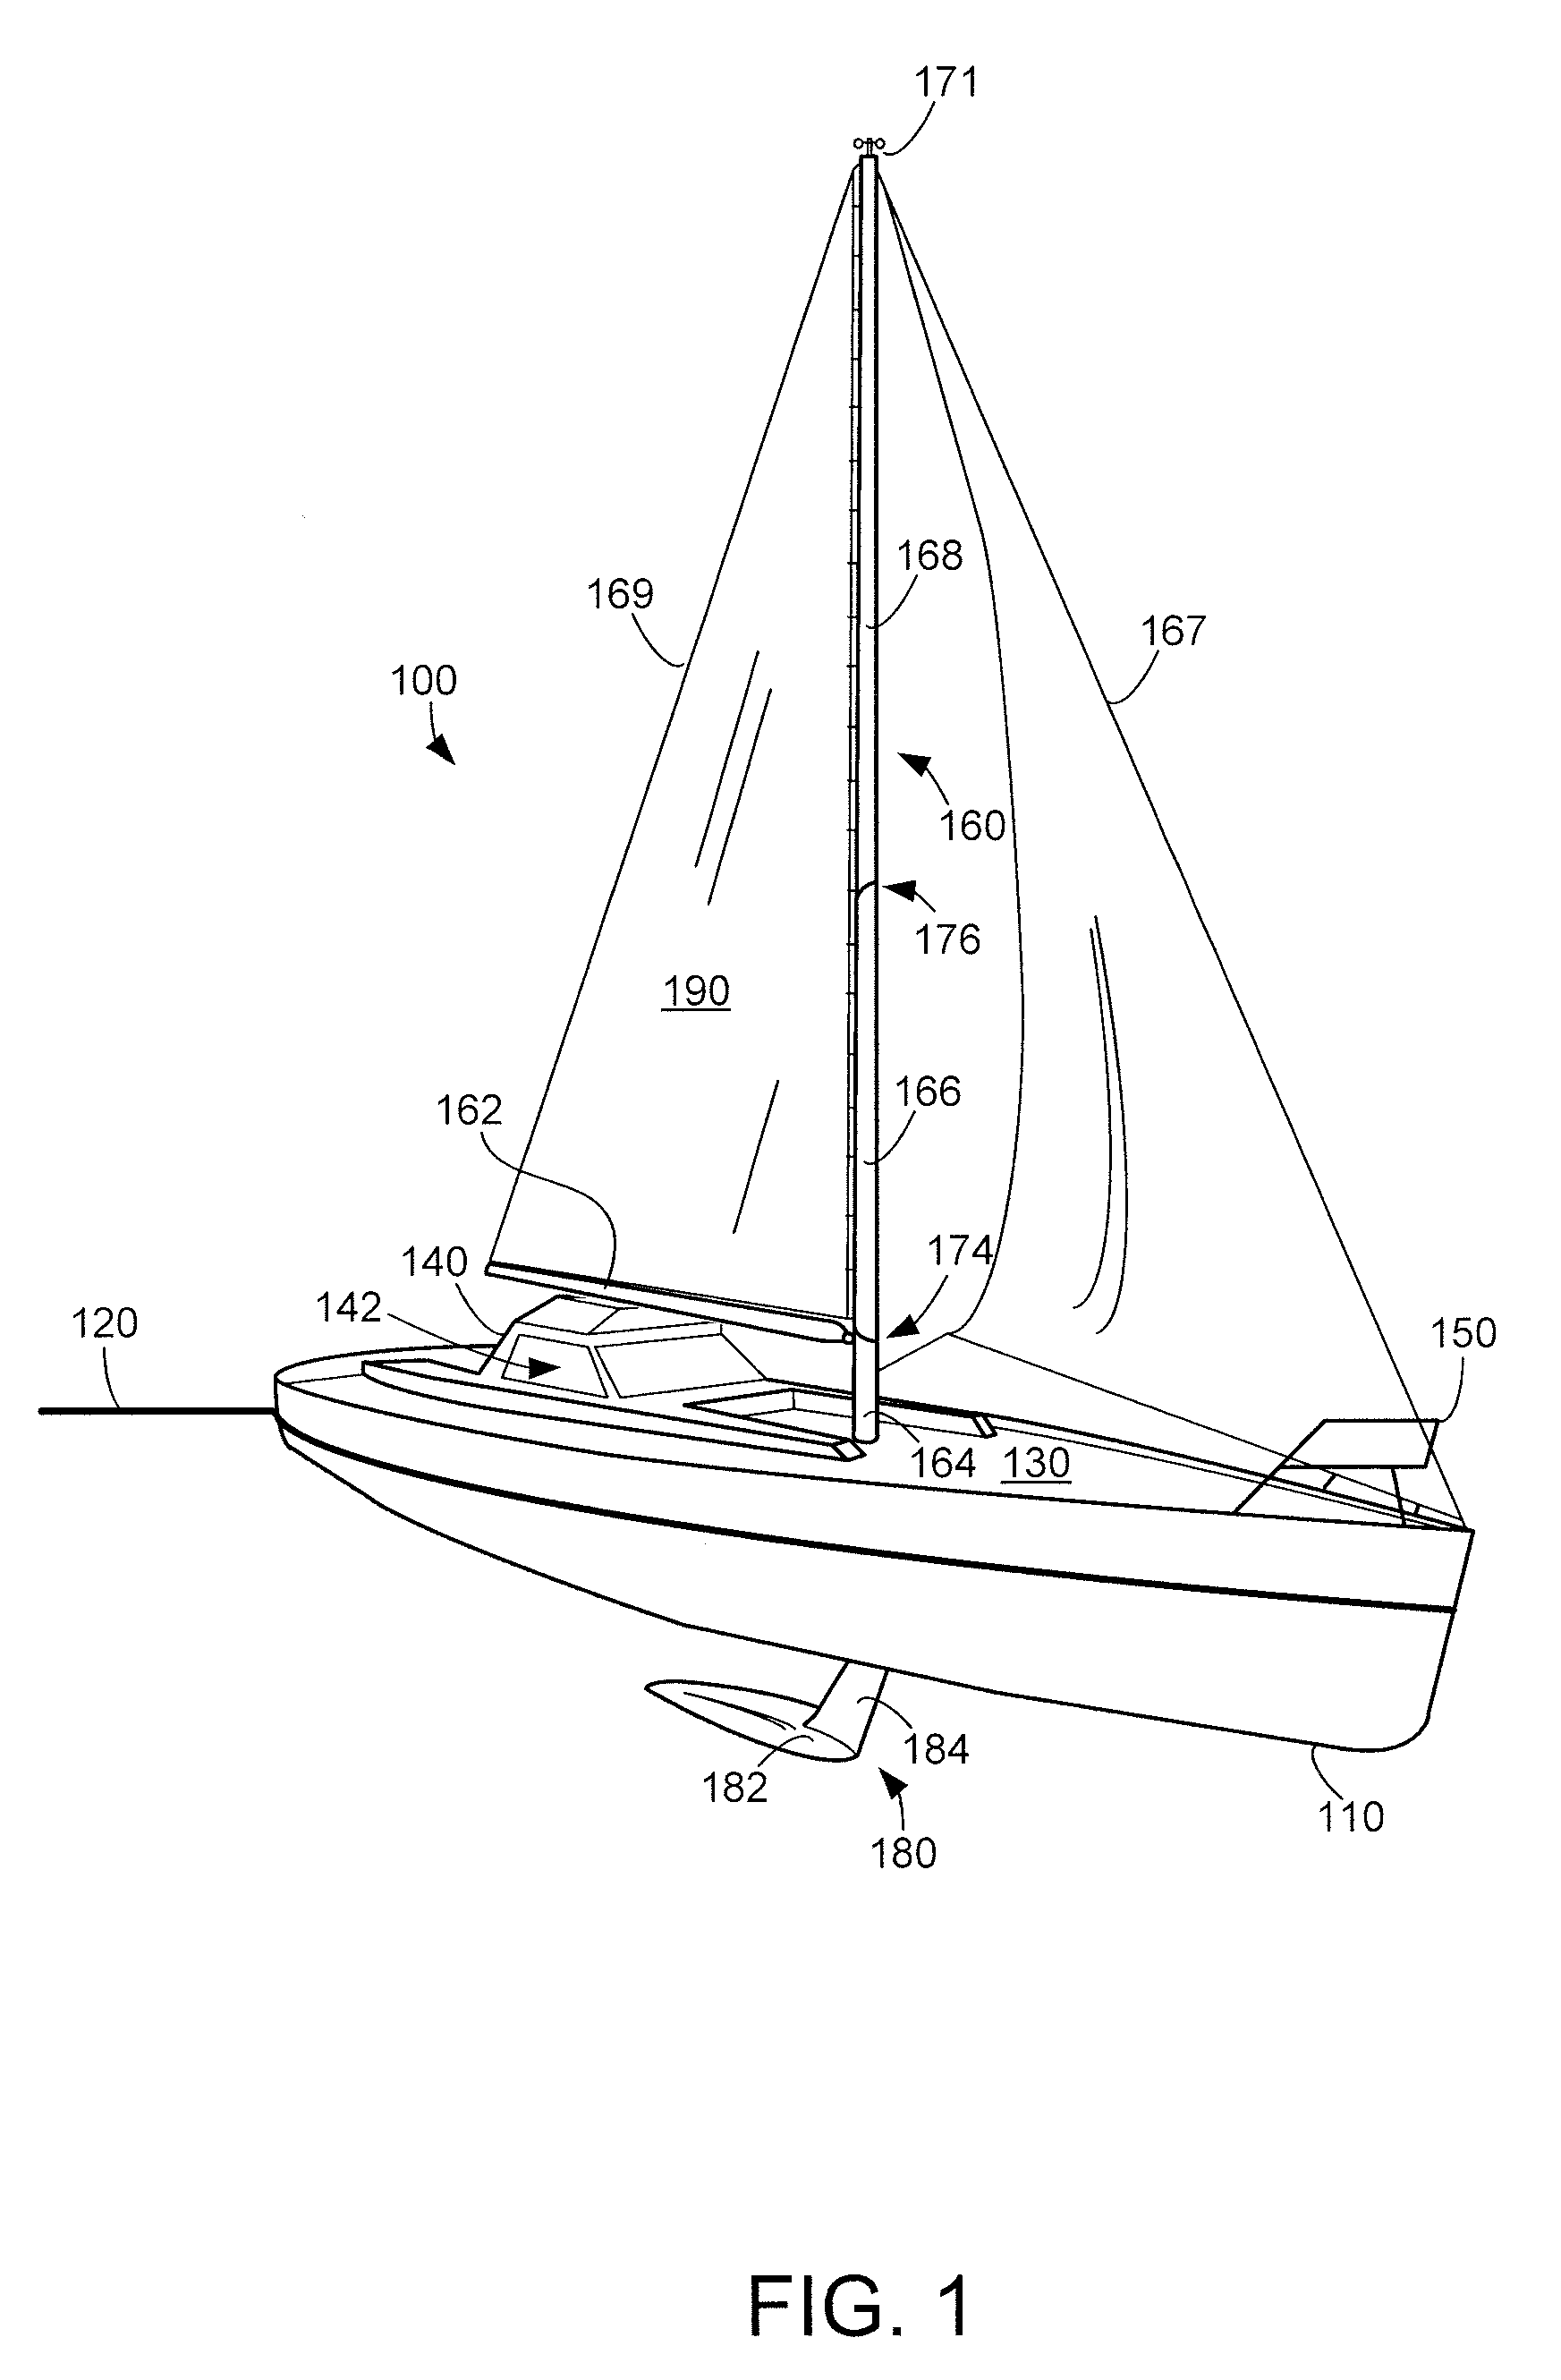 Foldable Mast Assembly for a Sailing Vessel